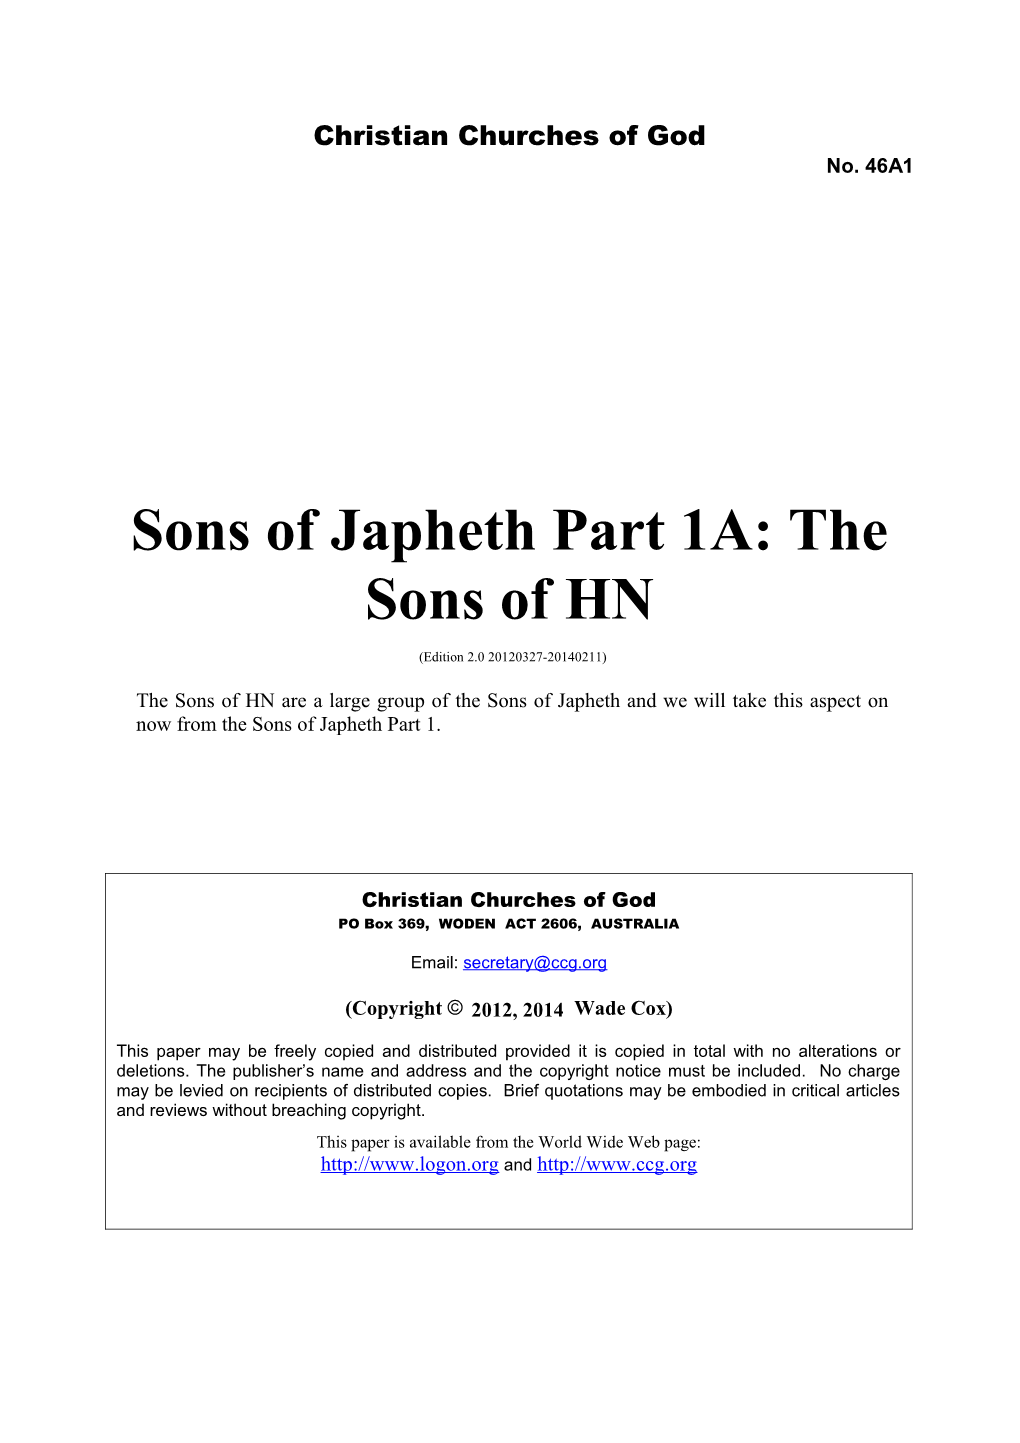 Sons of Japheth Part 1A: the Sons of HN (No. 46A1)